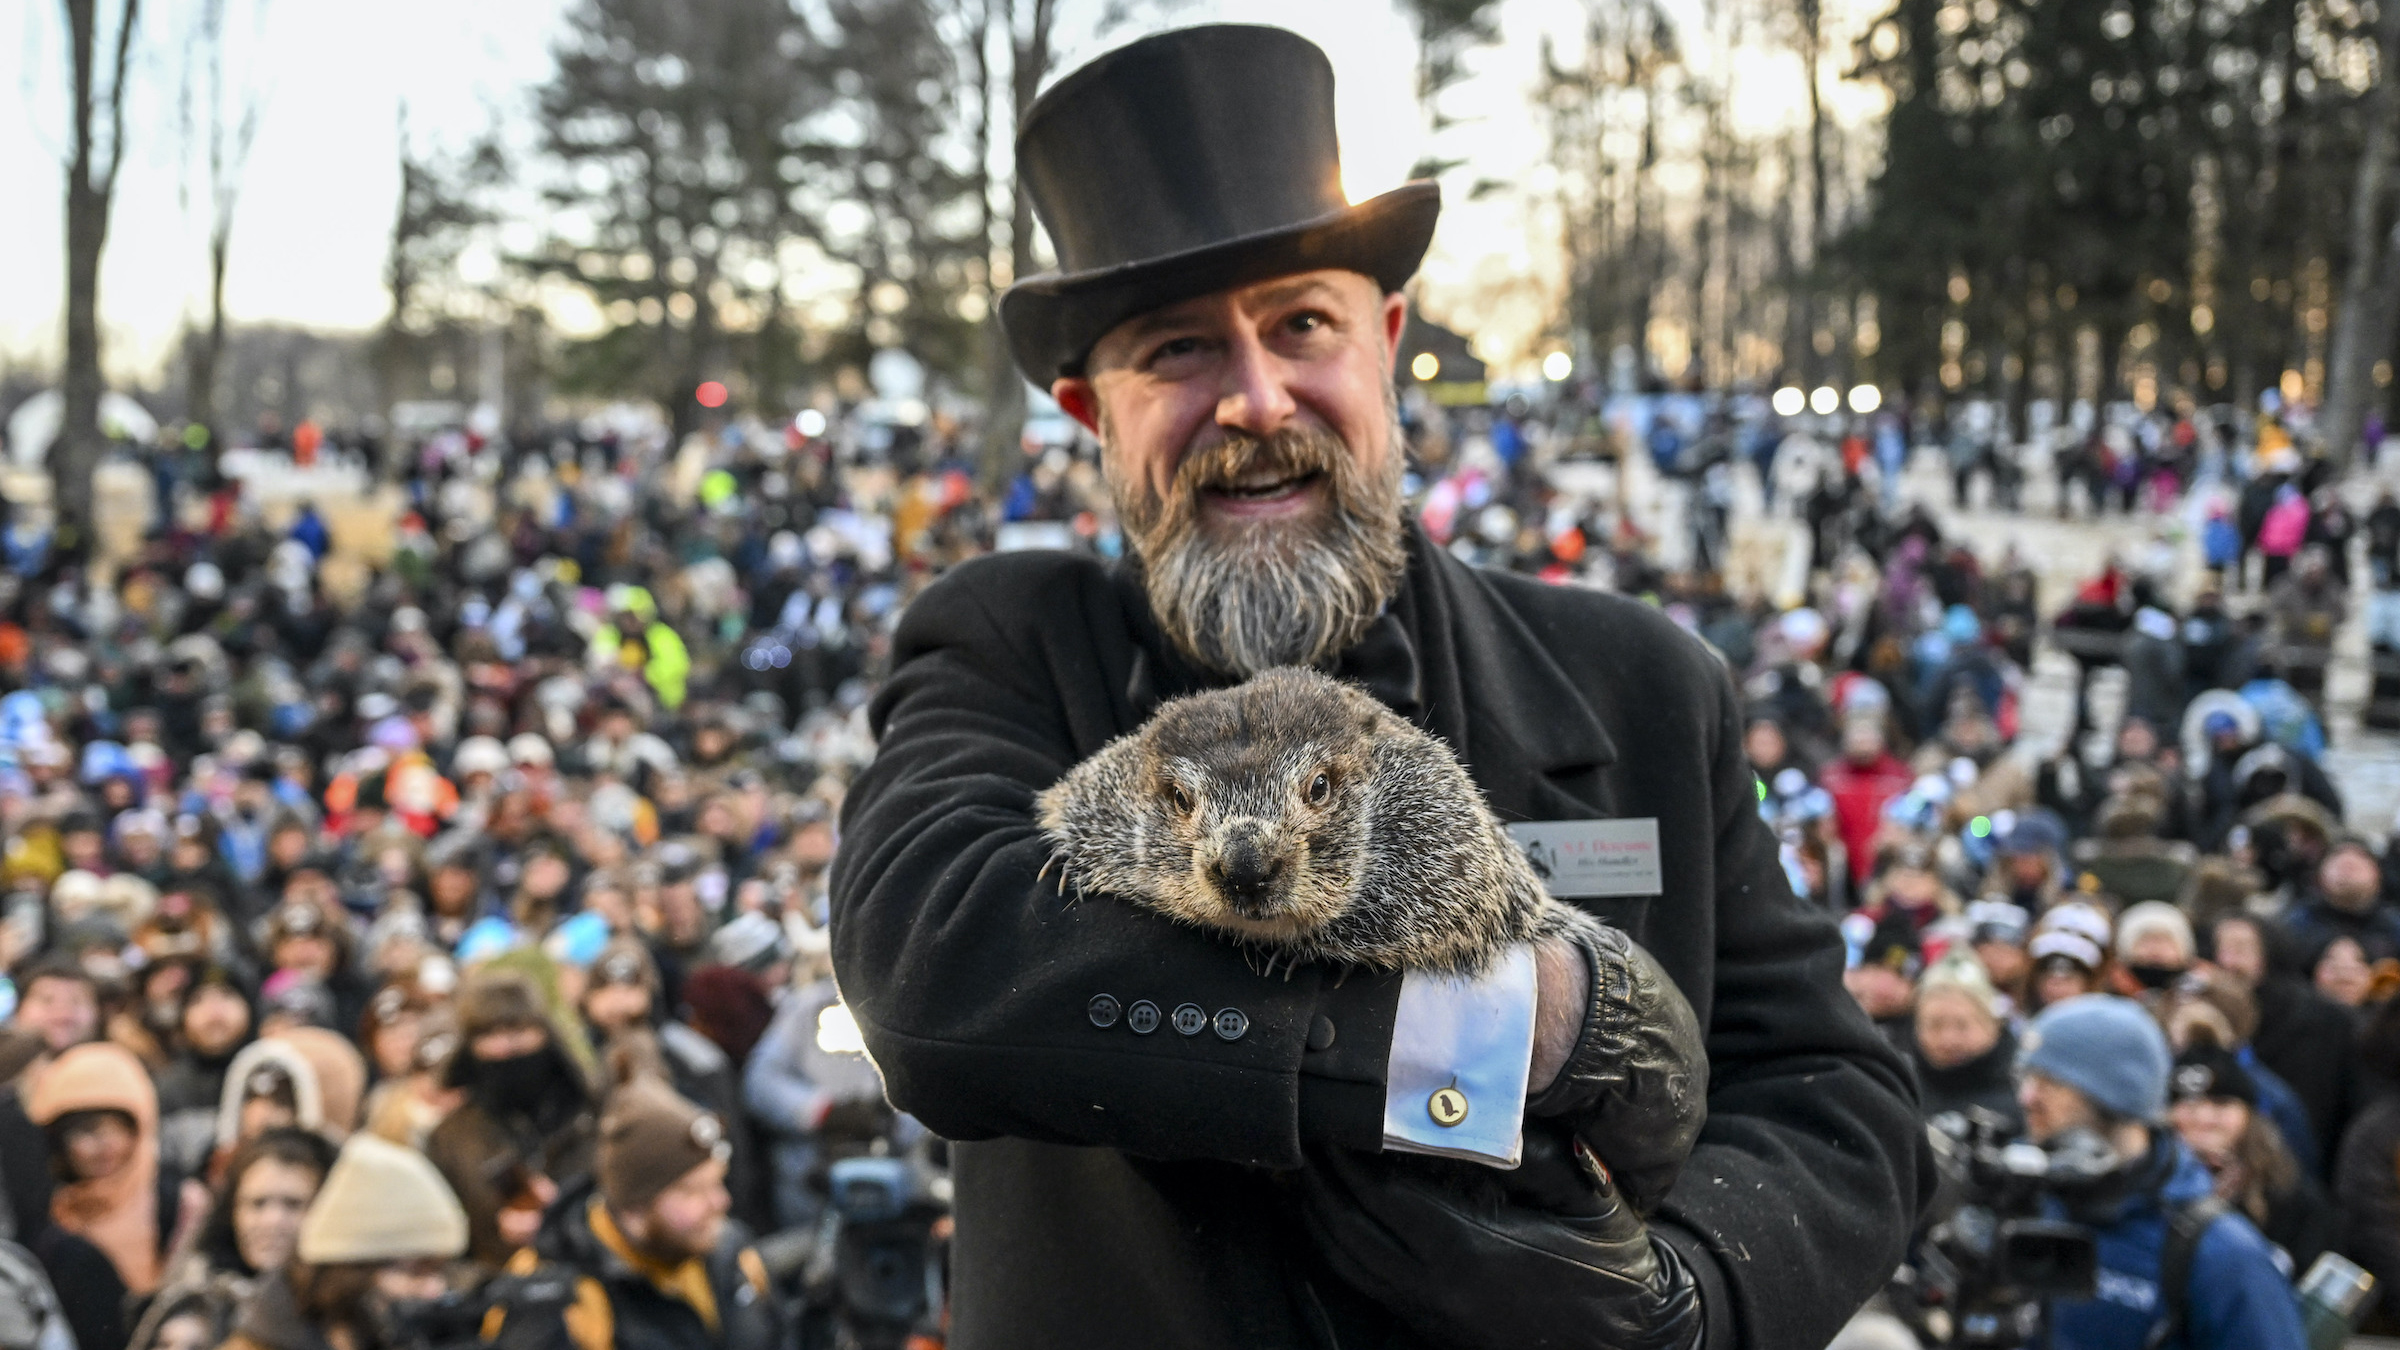 How accurate are Punxsutawney Phil's Groundhog Day forecasts? Live